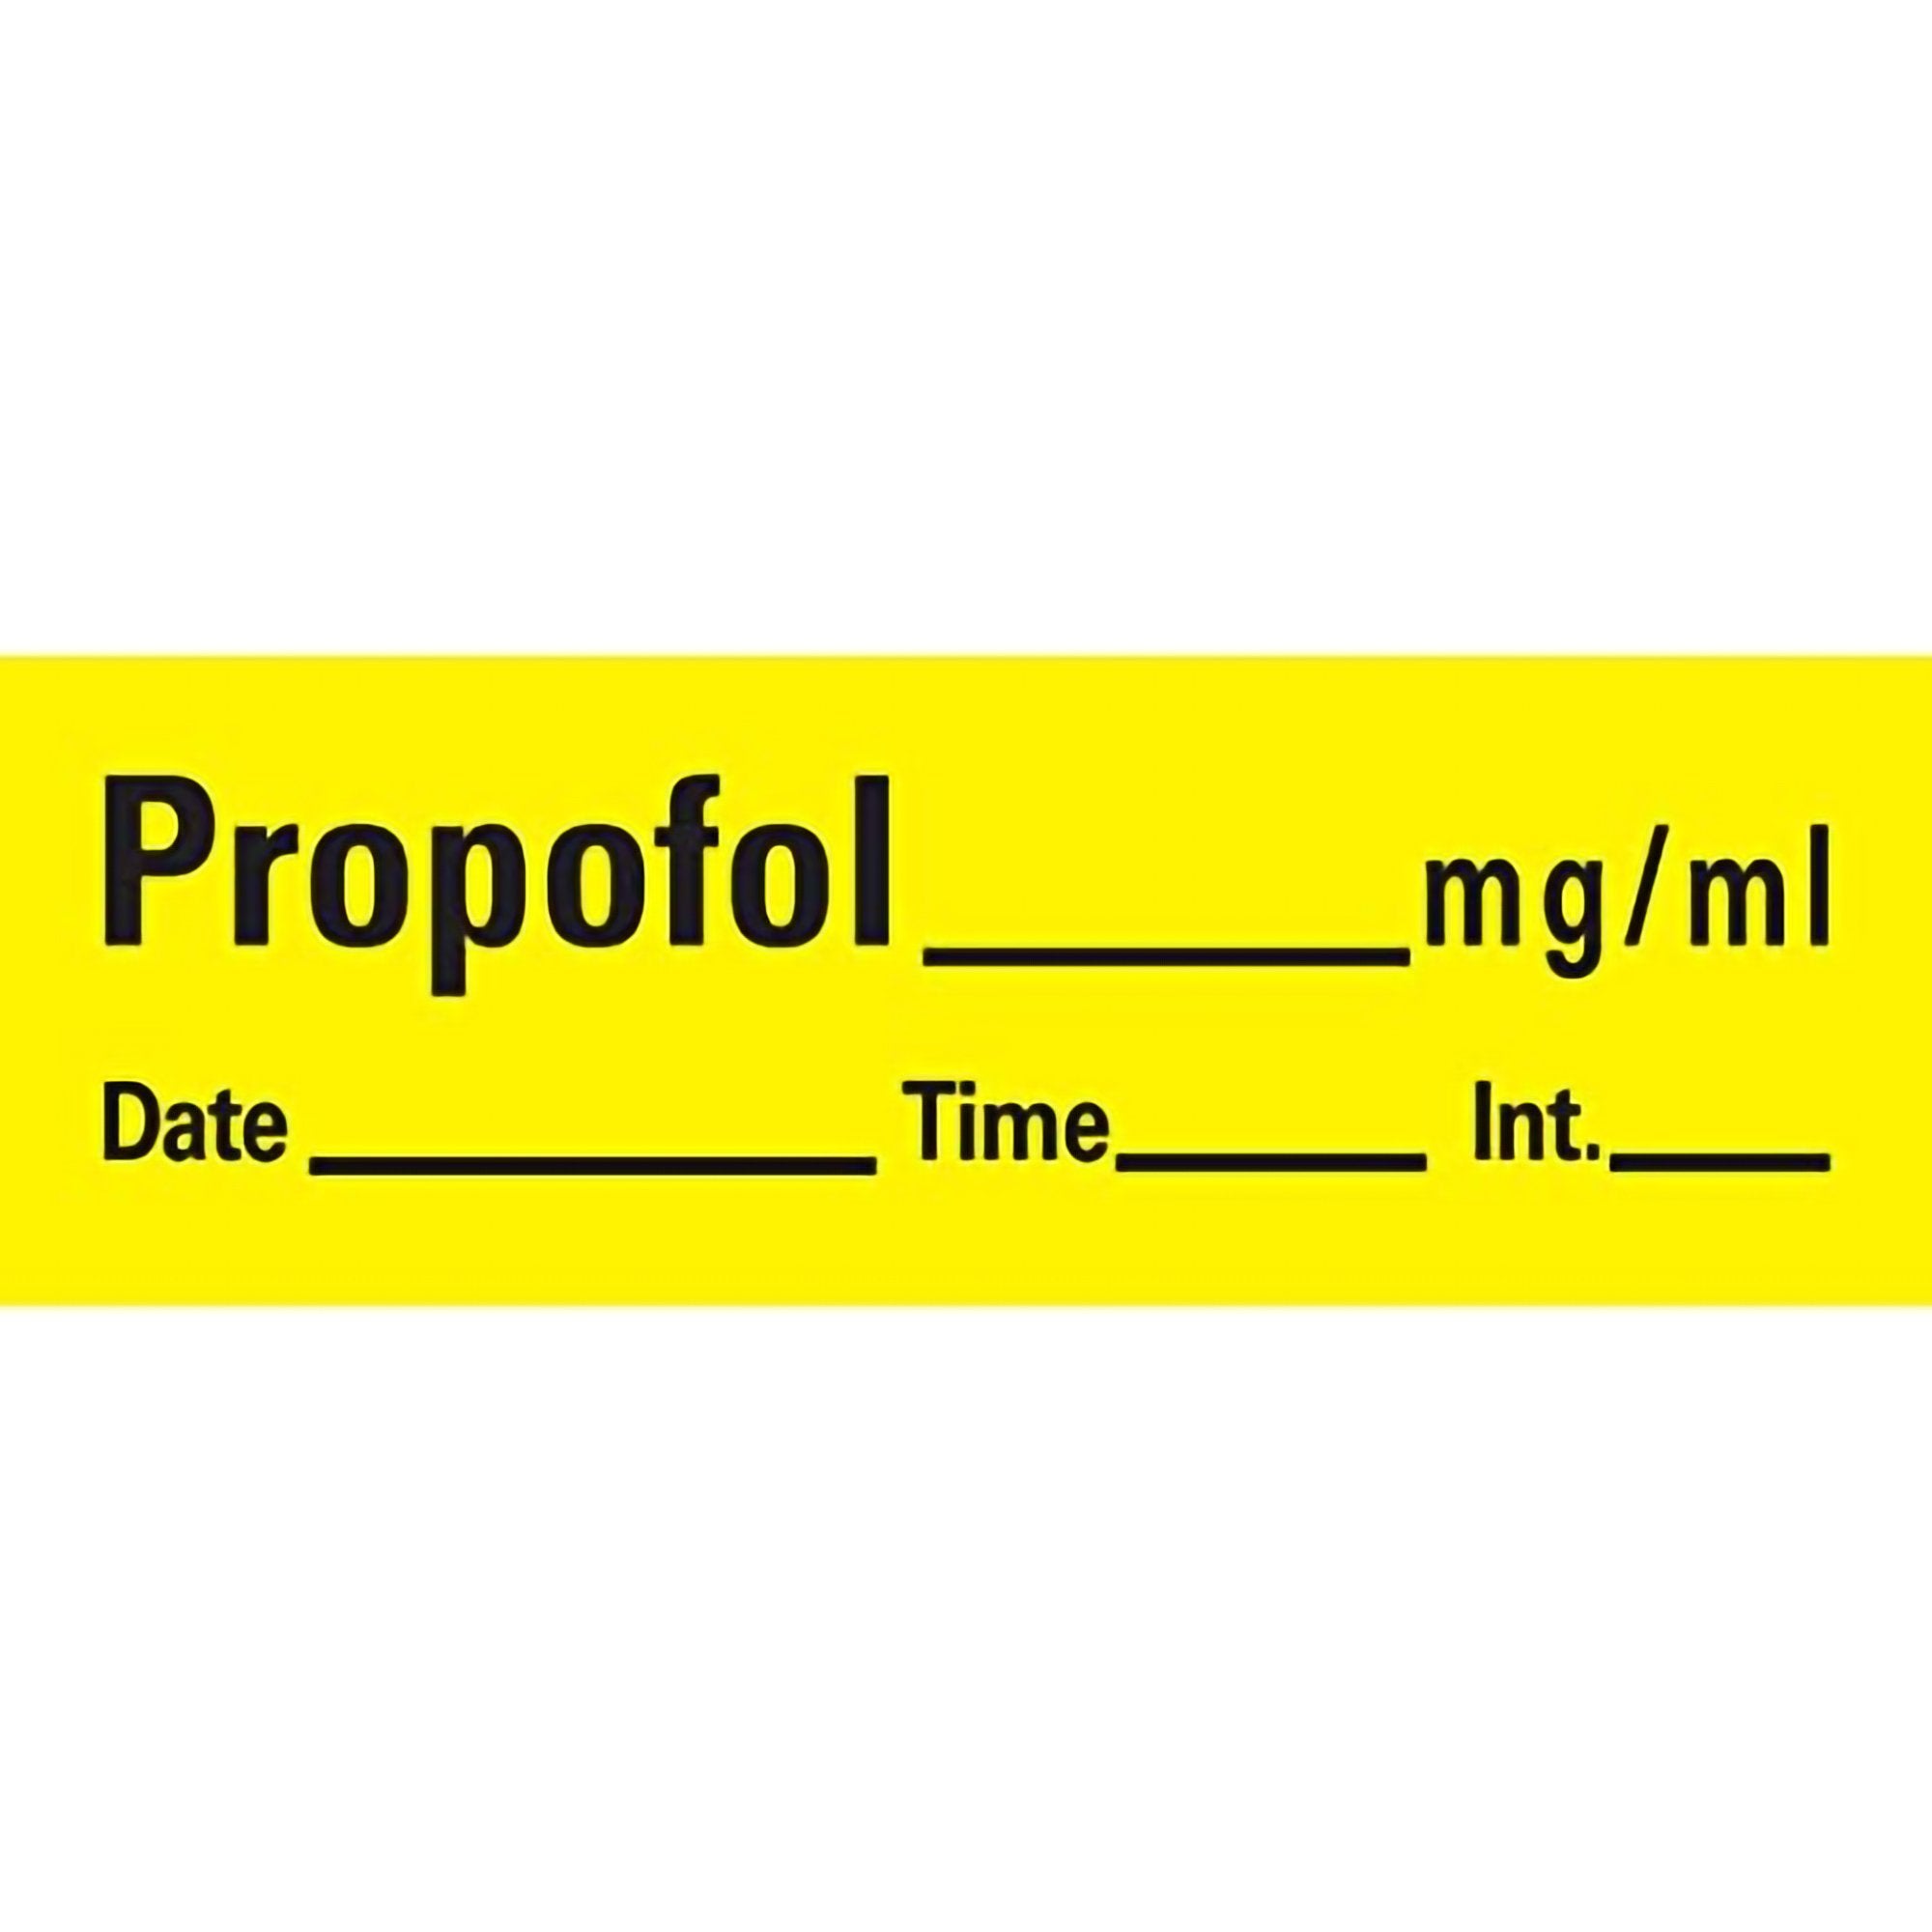 Drug Label Barkley® Anesthesia Label Tape Propofol_mg/mL Date_Time_Int_ Yellow 1/2 X 1-1/2 Inch